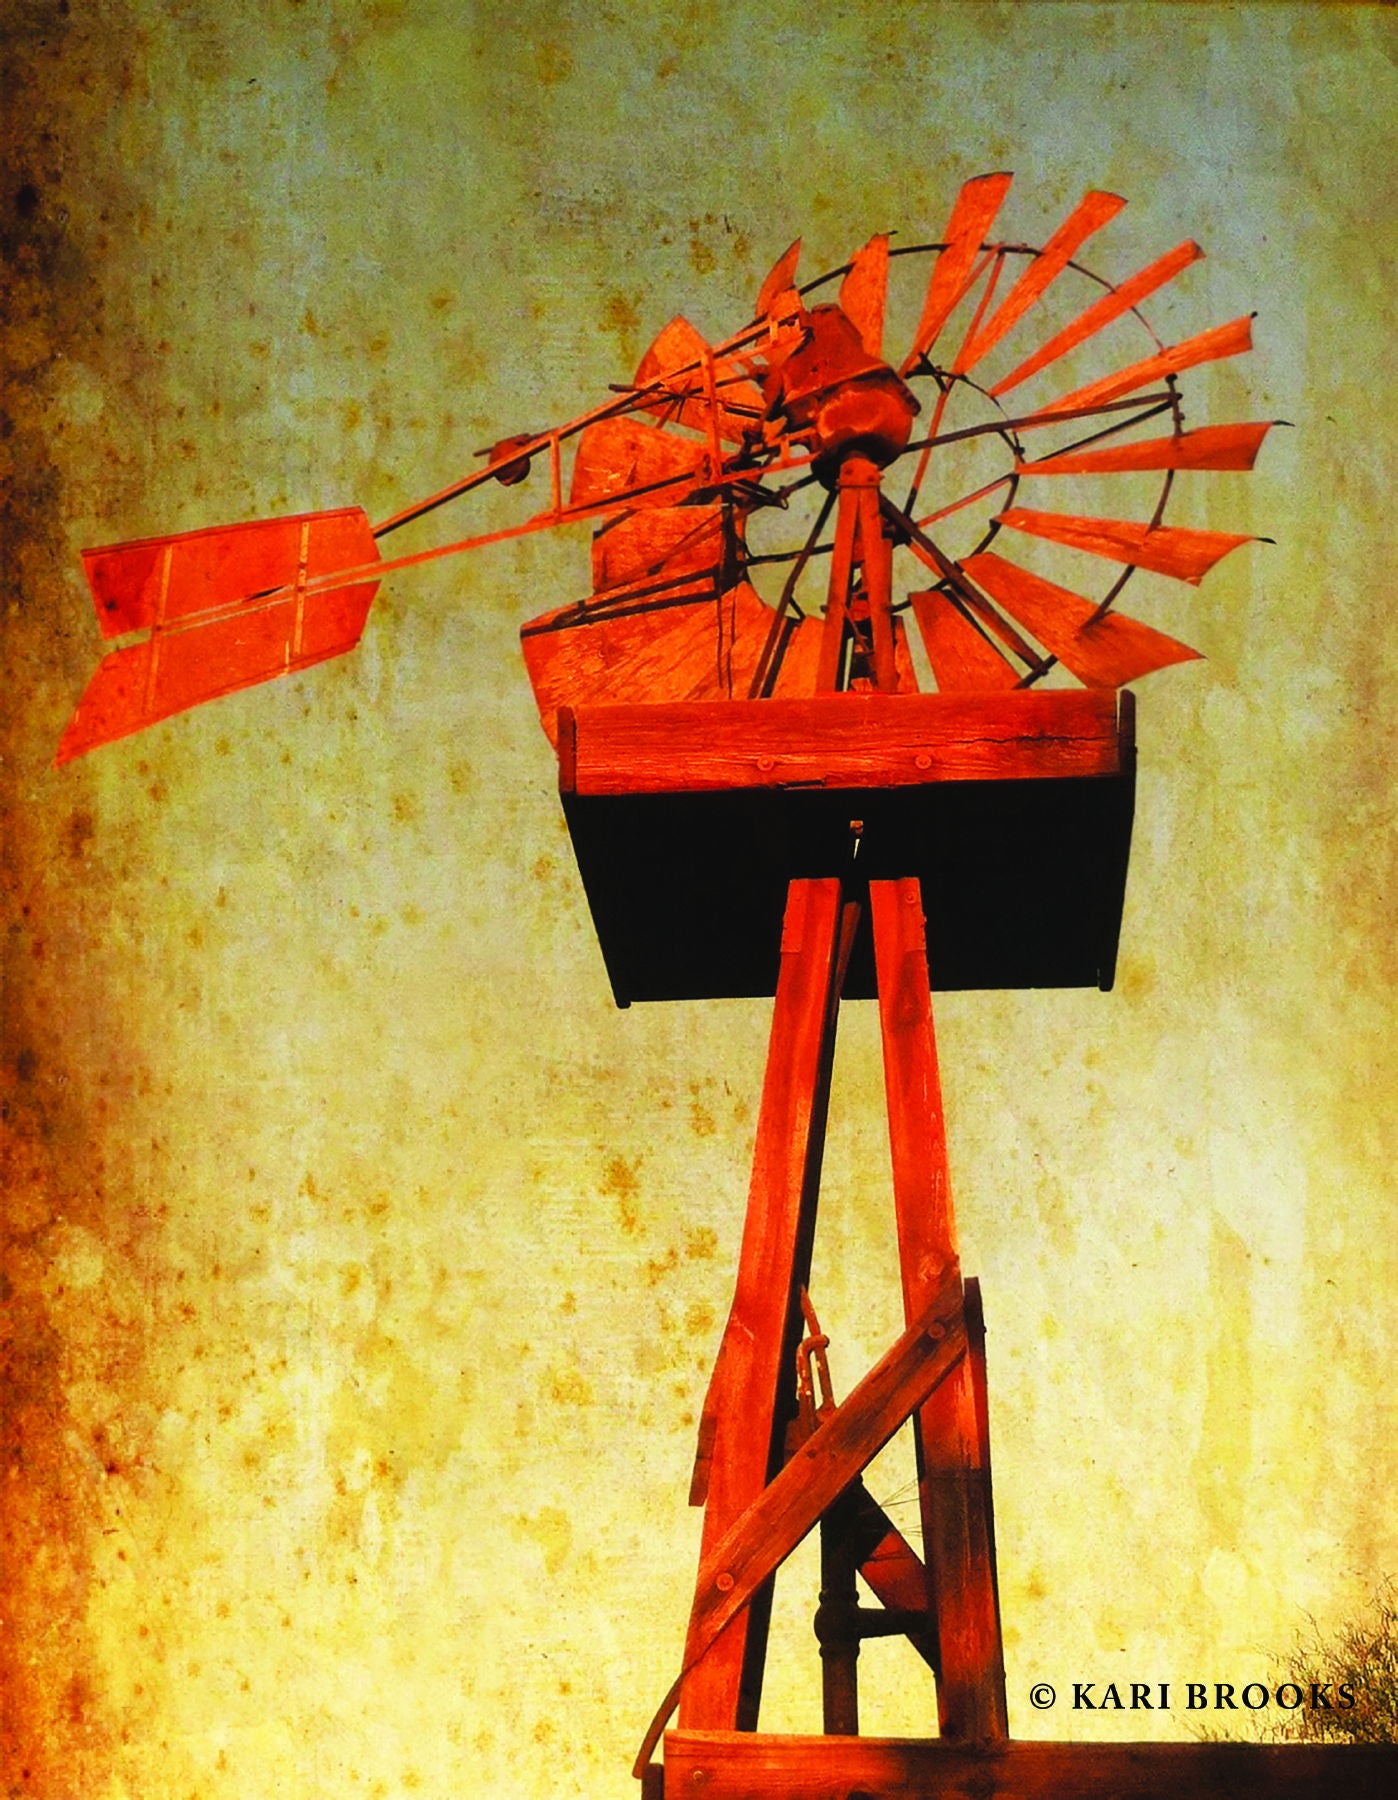 Framed - Chip's Windmill By Kari Brooks - Red